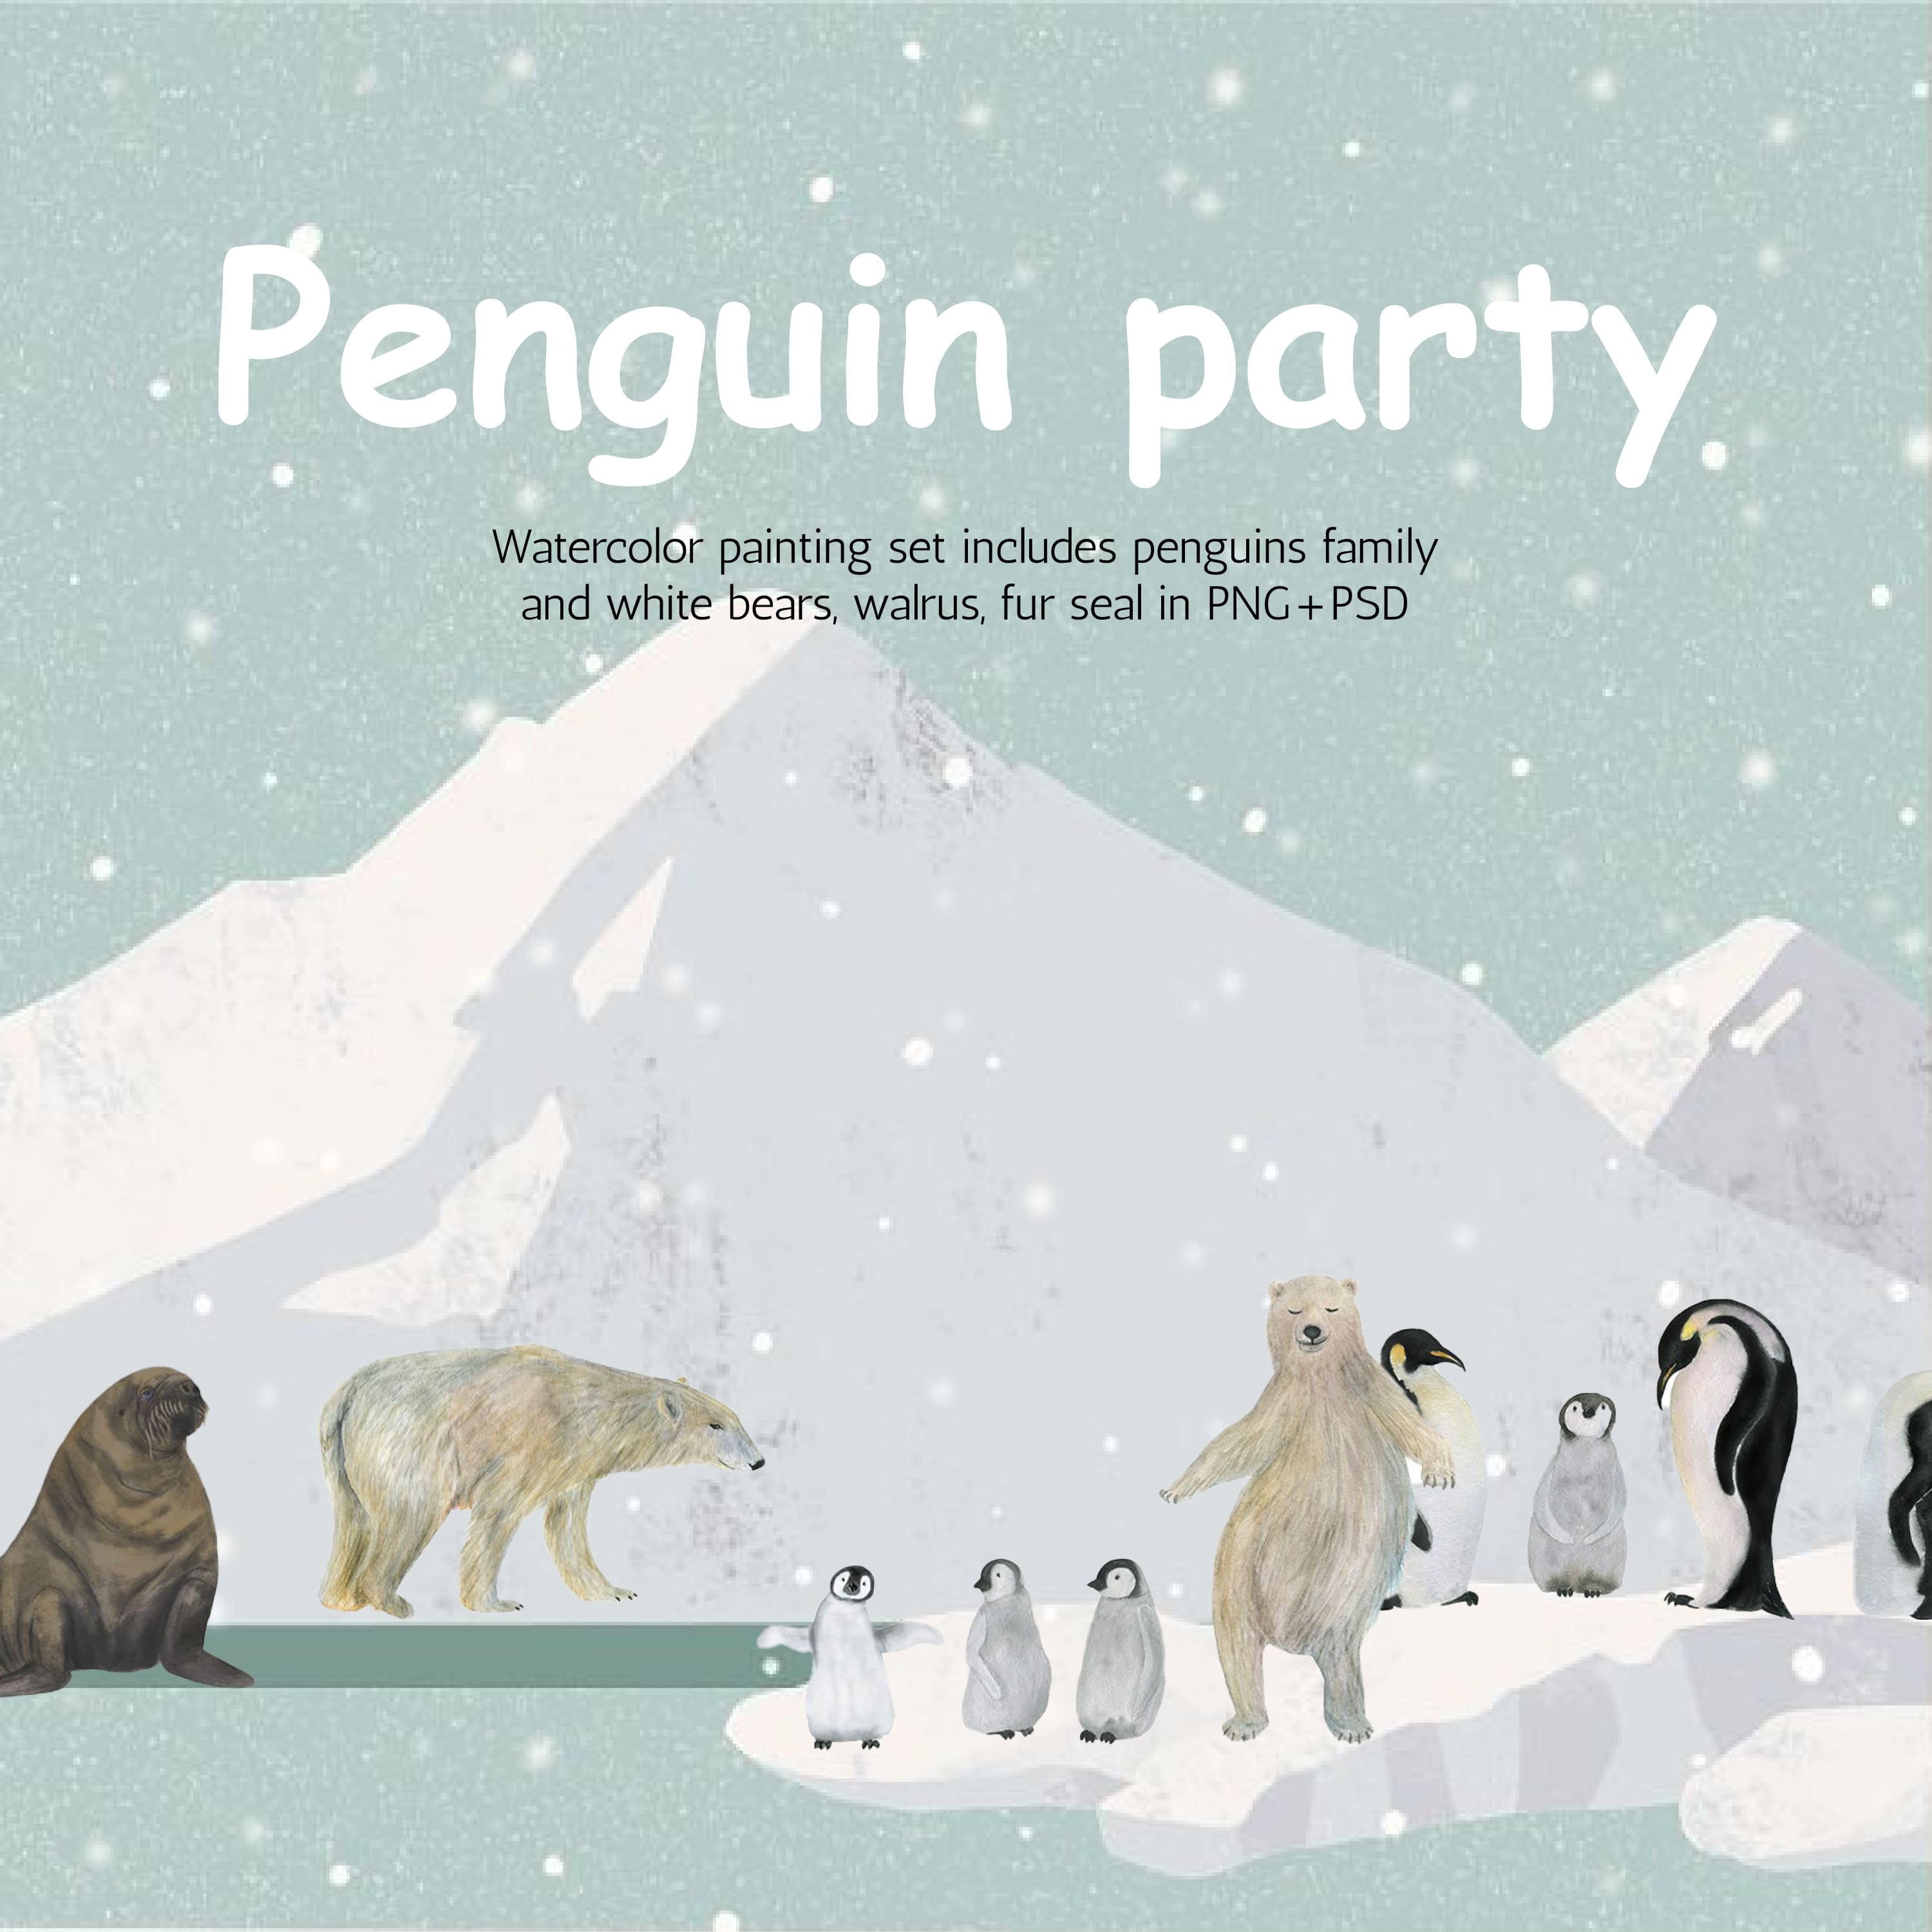 Penguin party cover.